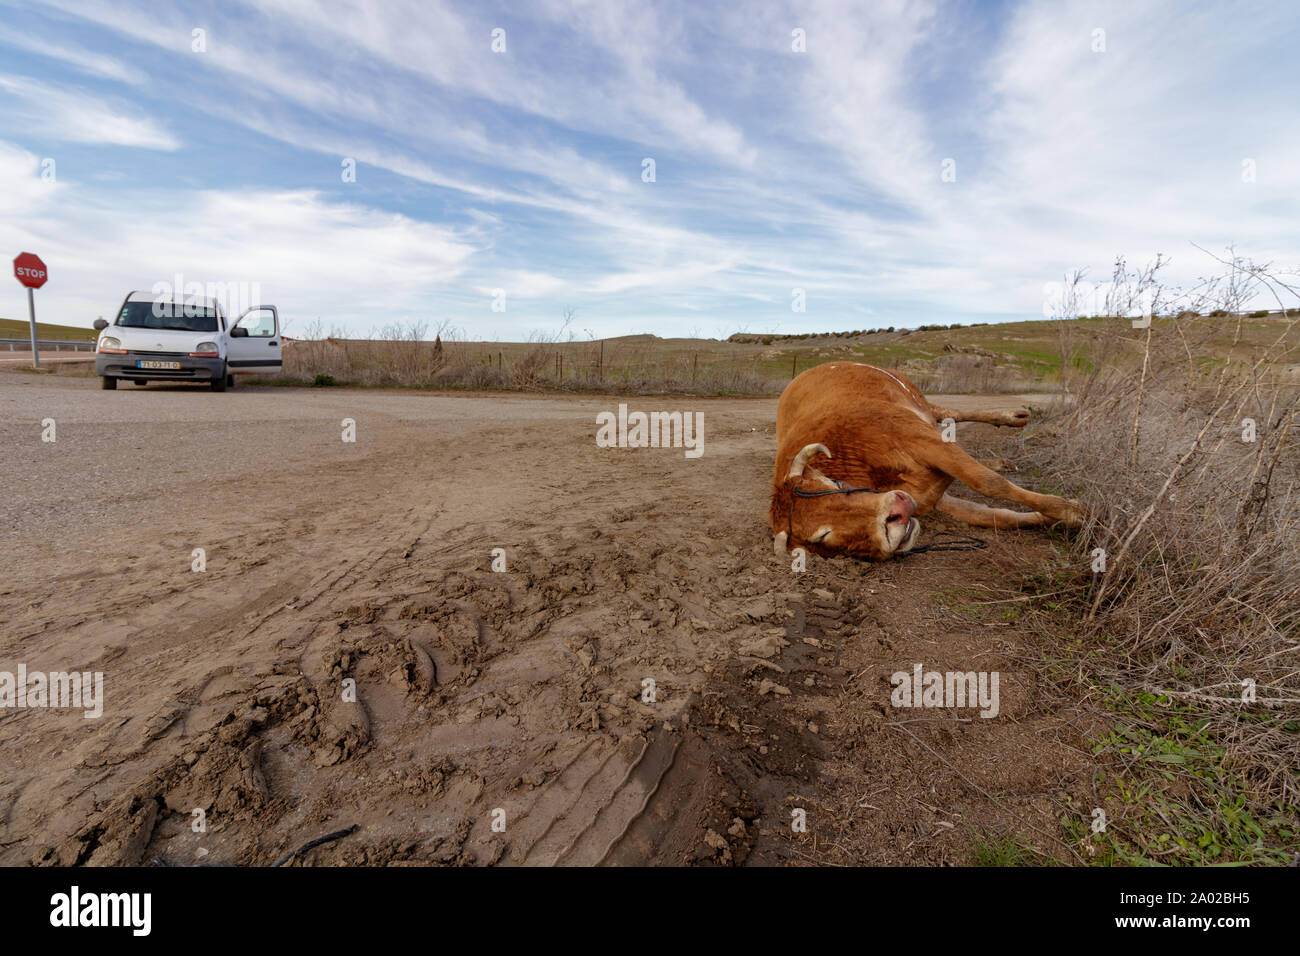 Extremadura / Spain - January 20 2018: Dead cow at the side of the road in Spain Stock Photo